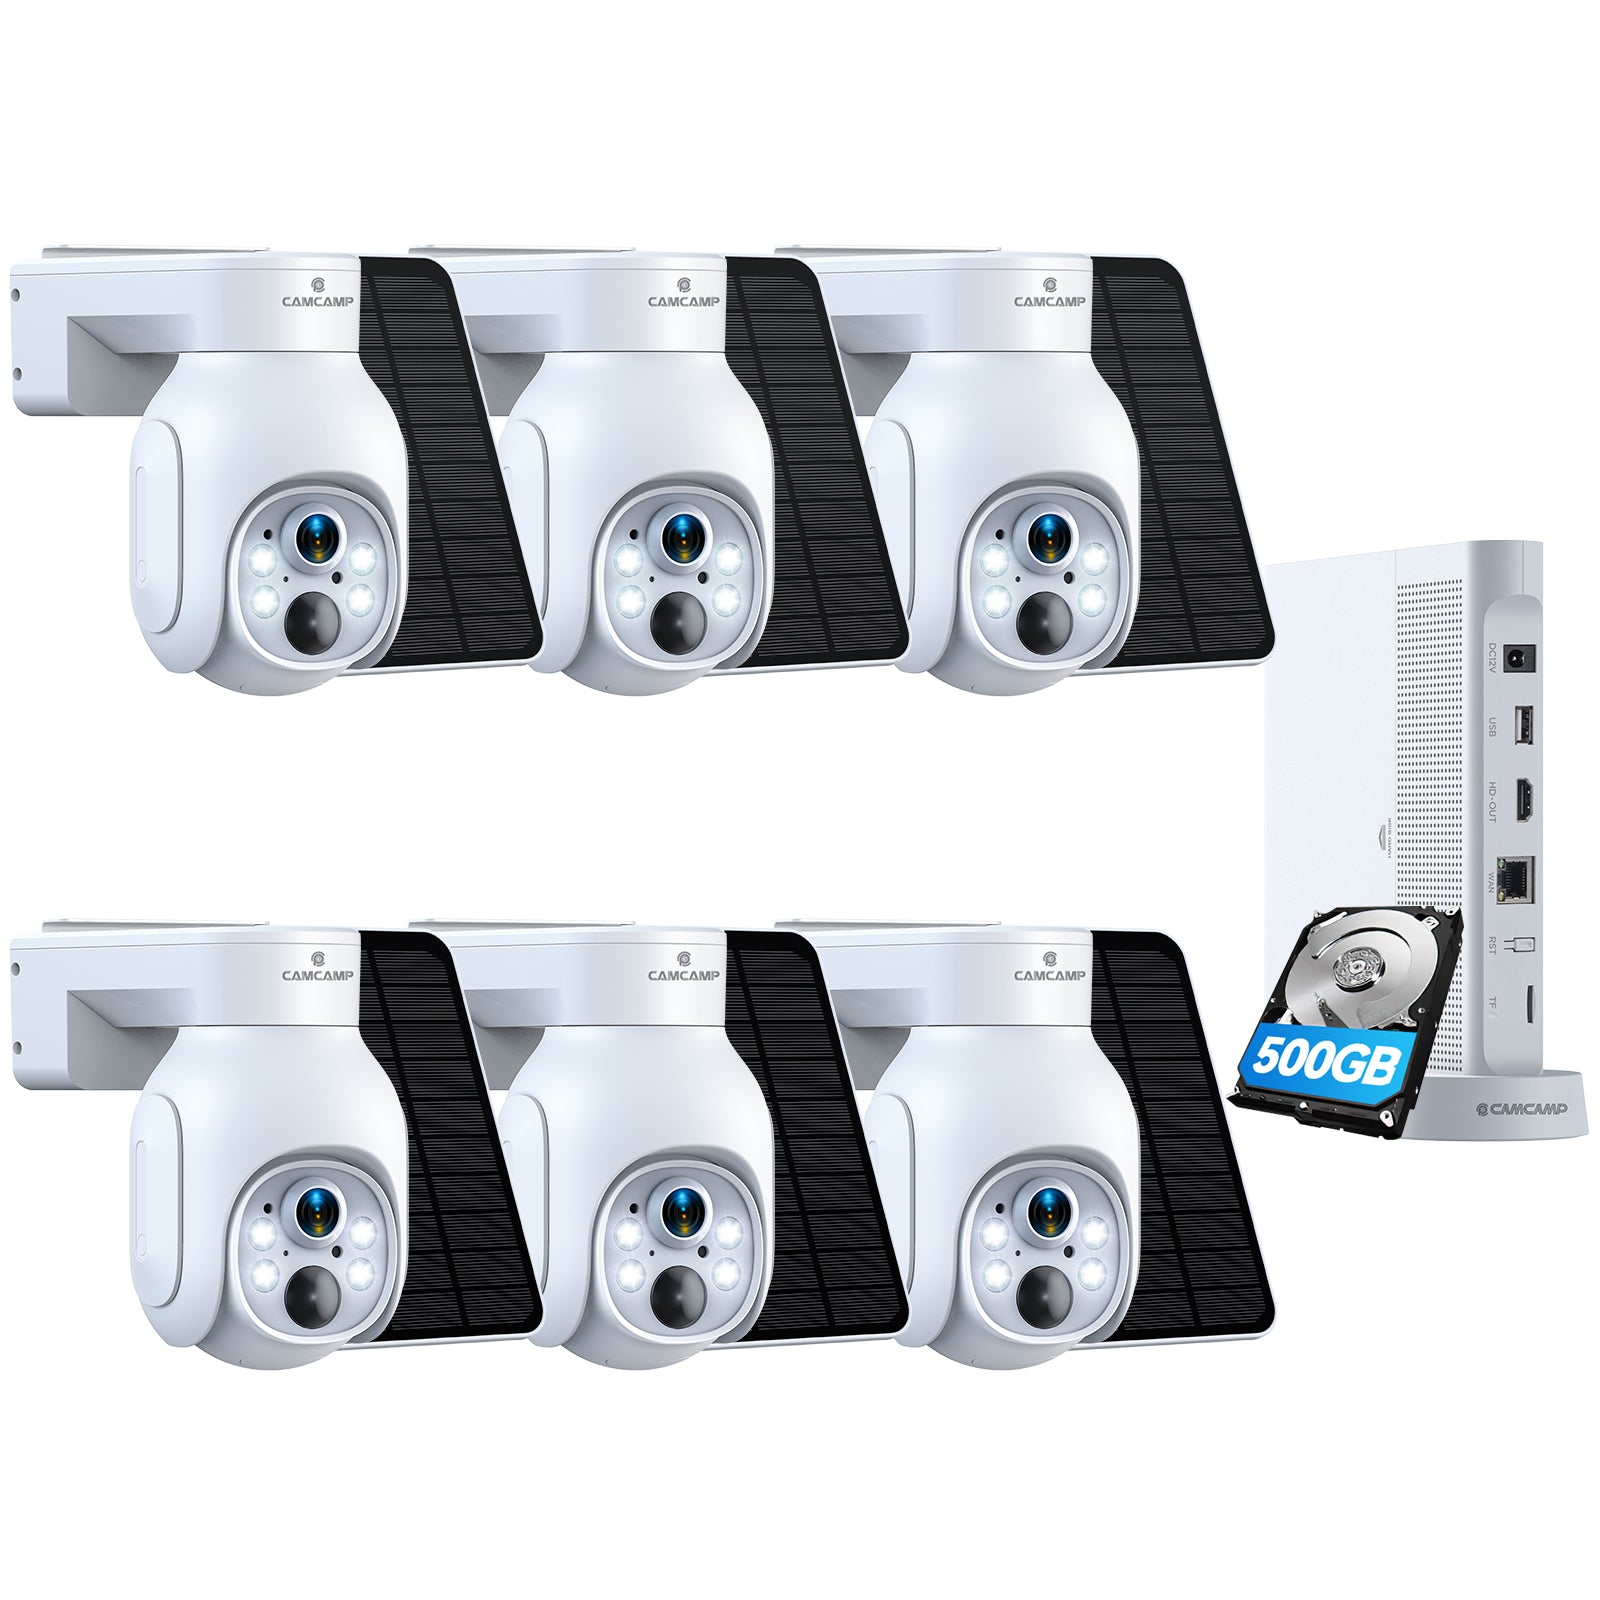 Campark SC23 4MP Security Camera System WiFi PTZ Wireless Solar Powered with 500GB Hard Drive